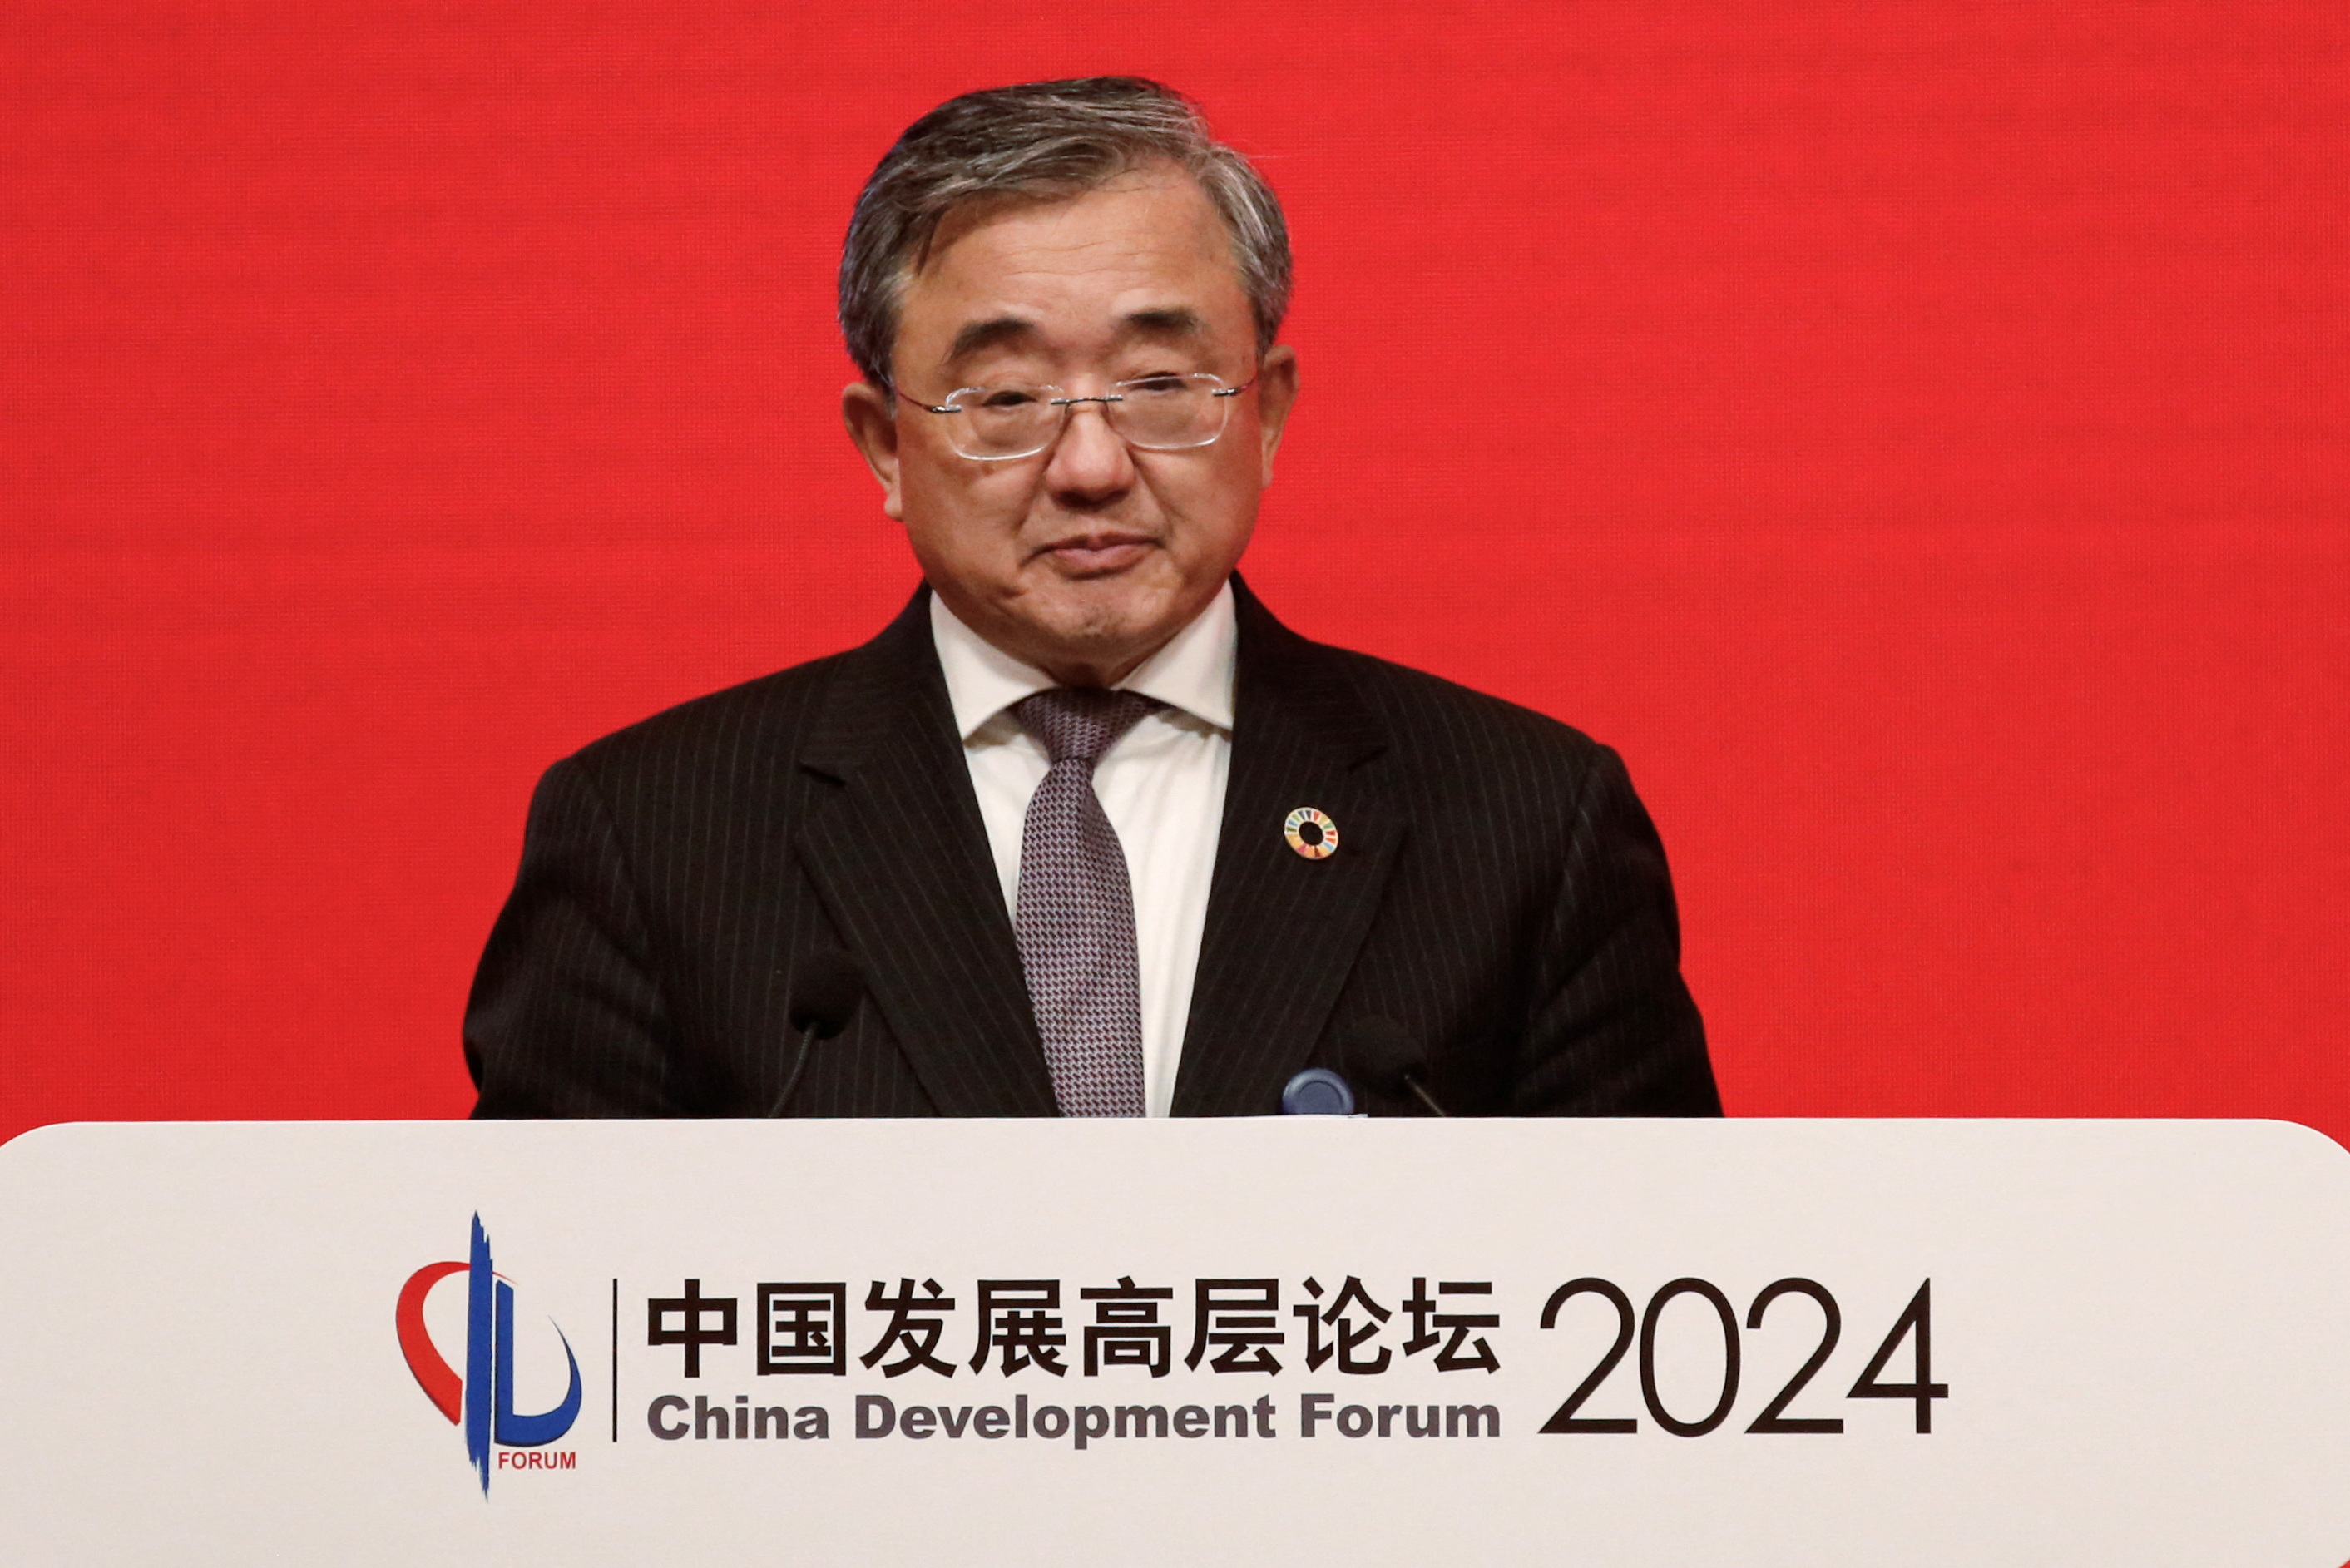 China's special envoy for climate change Liu Zhenmin speaks at the China Development Forum (CDF) 2024, in Beijing